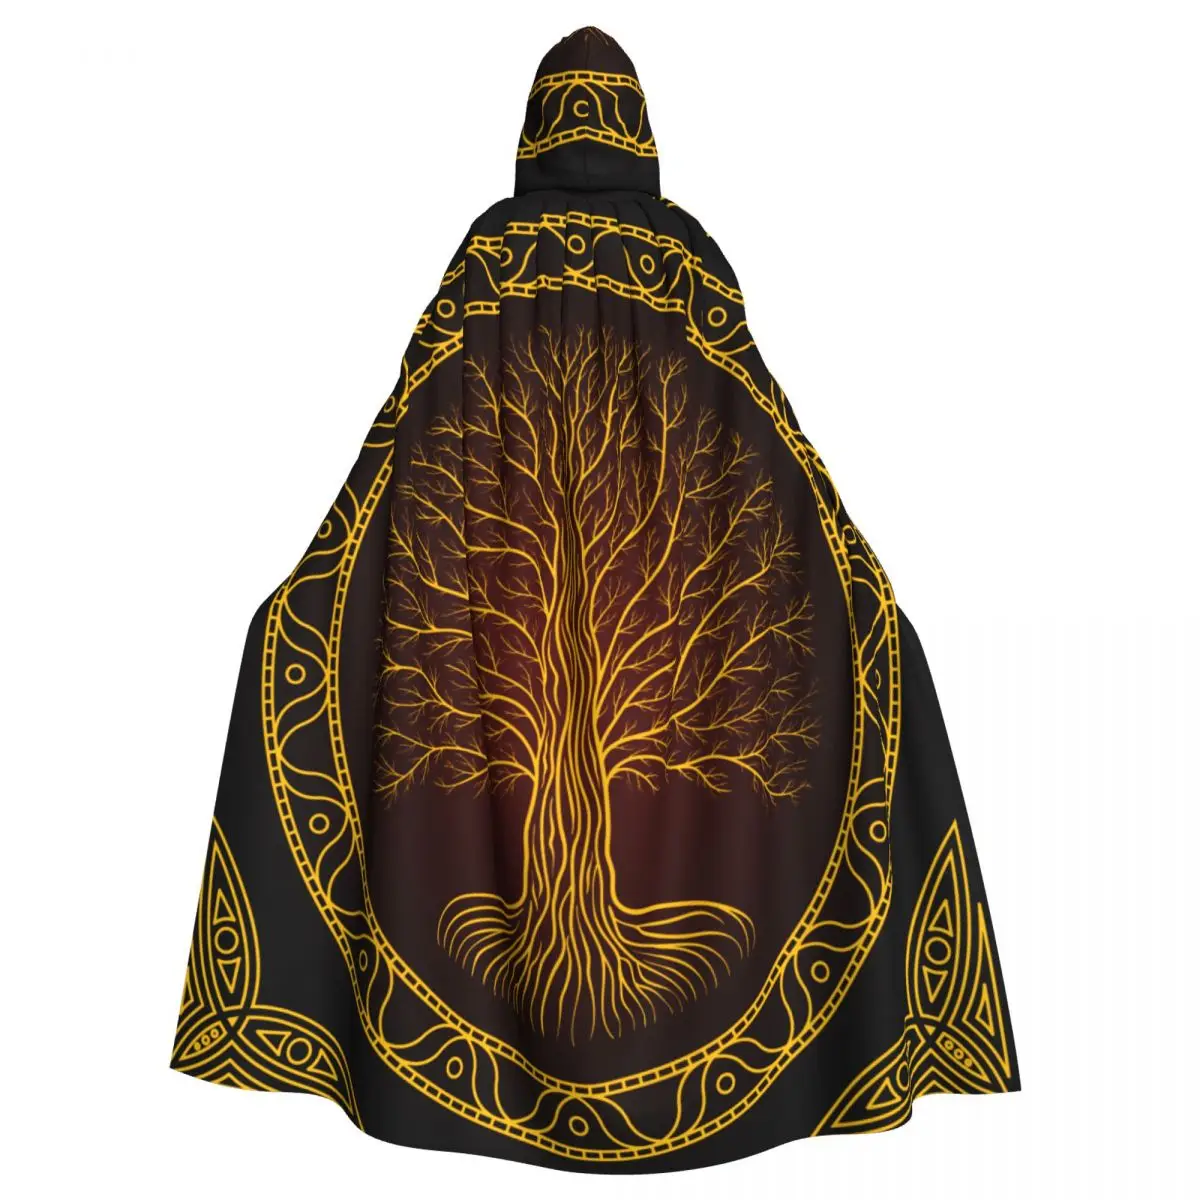 

Unisex Adult Yggdrasil Tree Of Life Cloak with Hood Long Witch Costume Cosplay